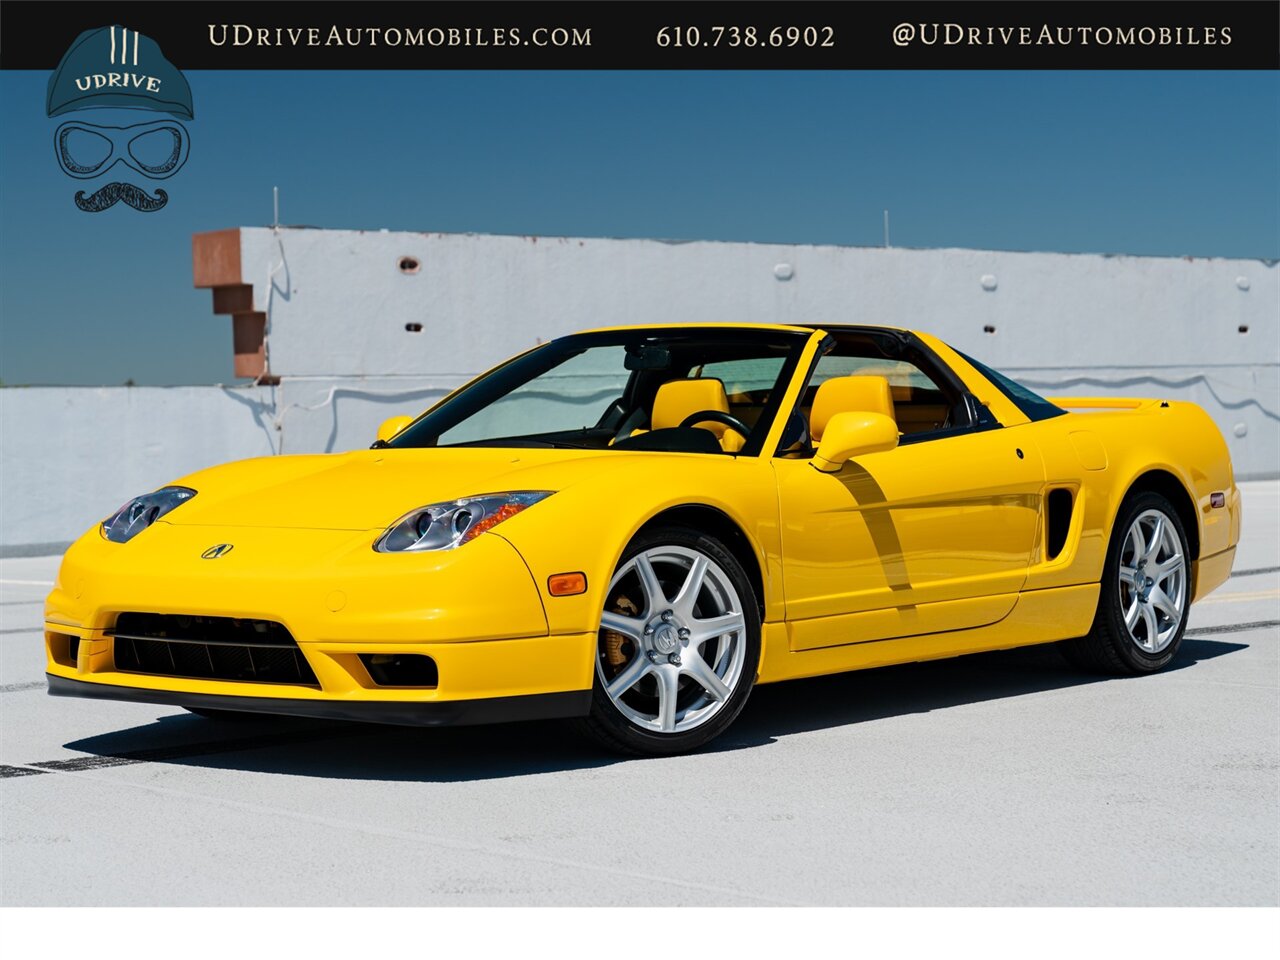 2003 Acura NSX NSX-T  Spa Yellow over Yellow Lthr 1 of 13 Produced - Photo 27 - West Chester, PA 19382